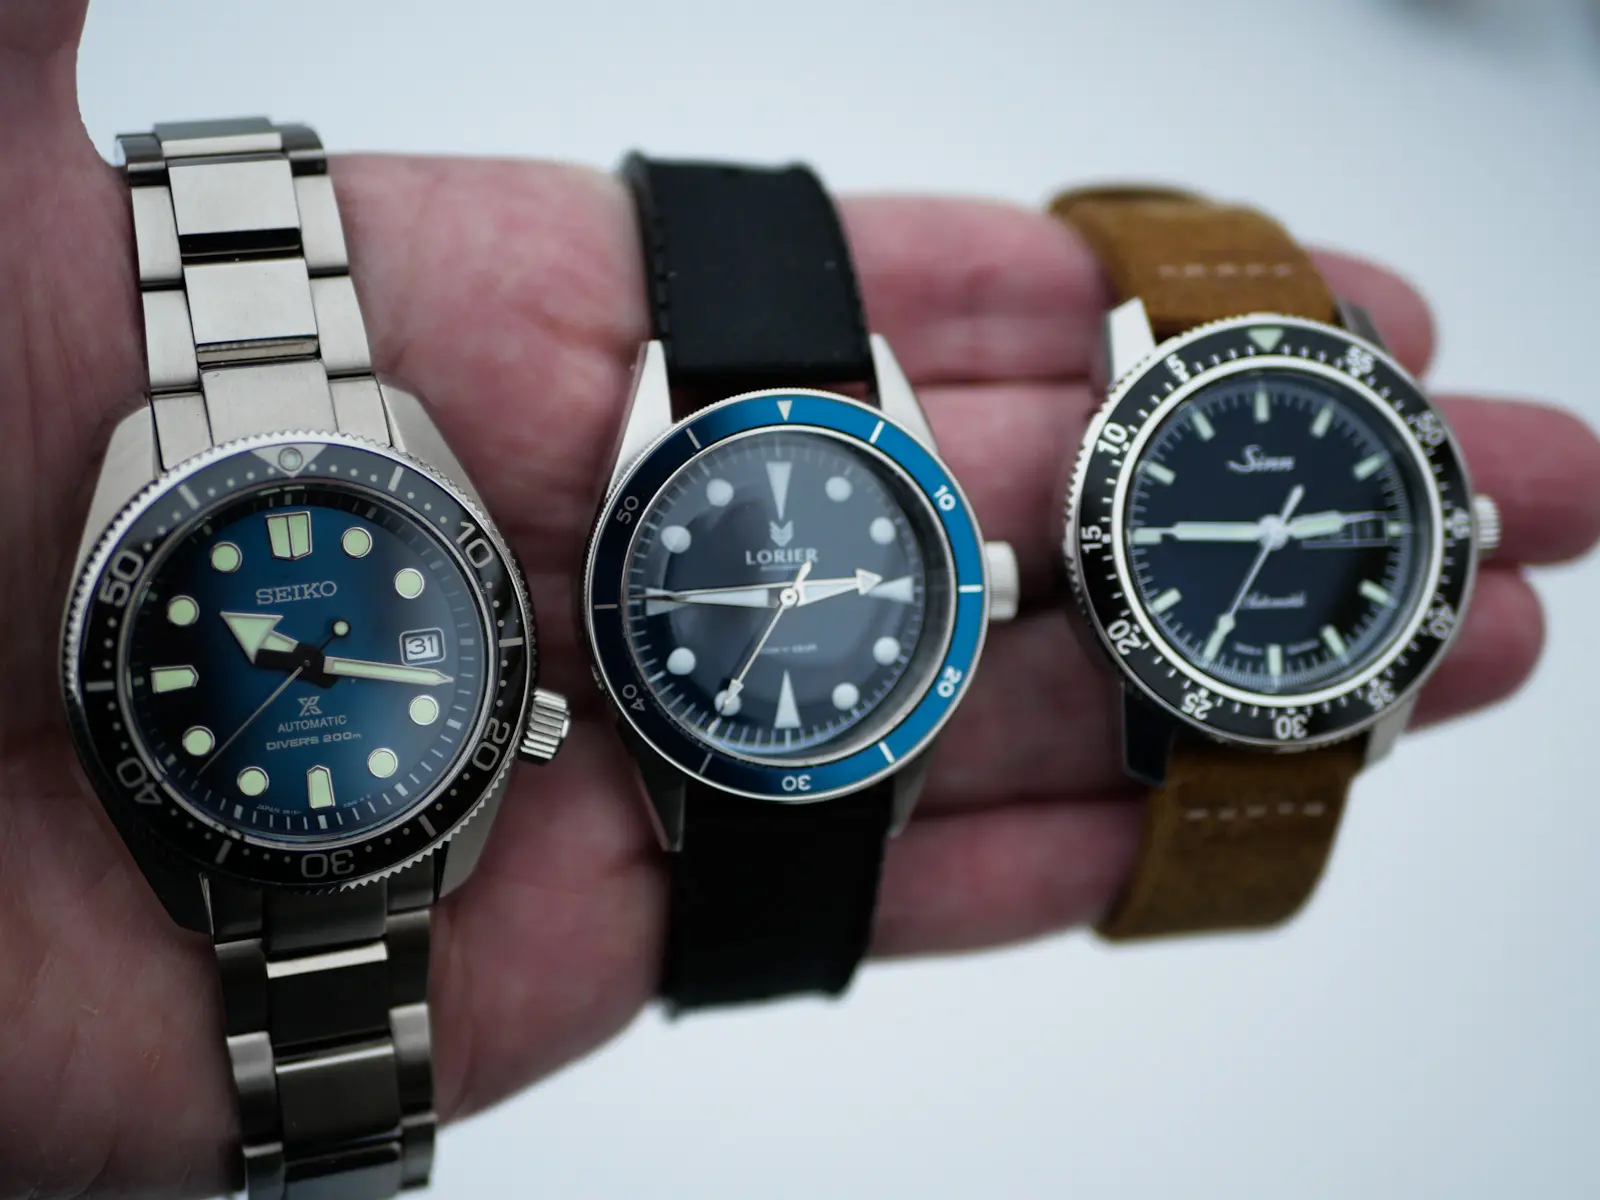 The watches I wore the most in 2020: The Seiko Prospex SPB083J1